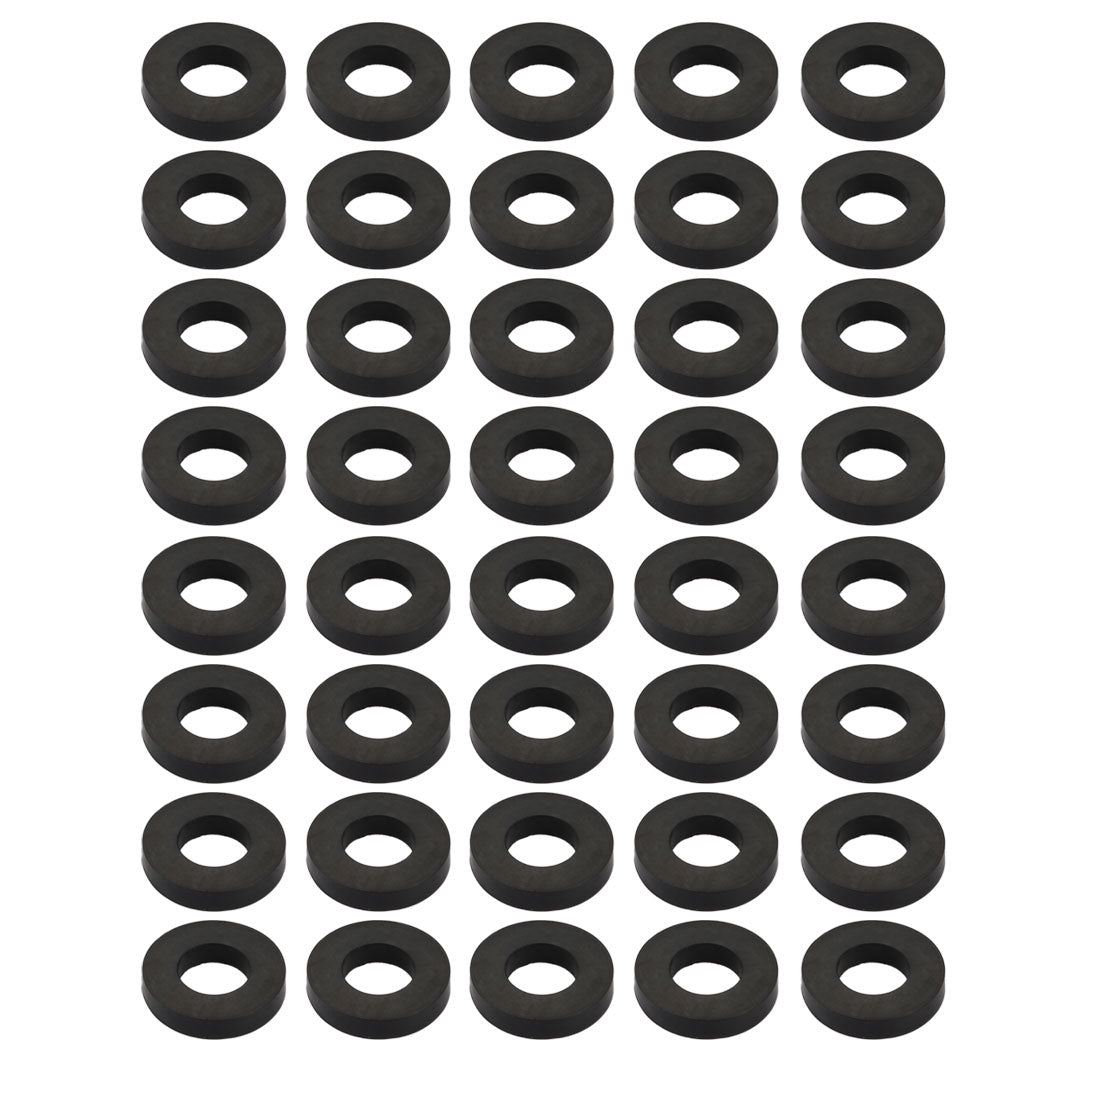 Uxcell Uxcell 40pcs Black Rubber Round Flat Washer Assortment Size 6x14x2.5mm Flat Washer